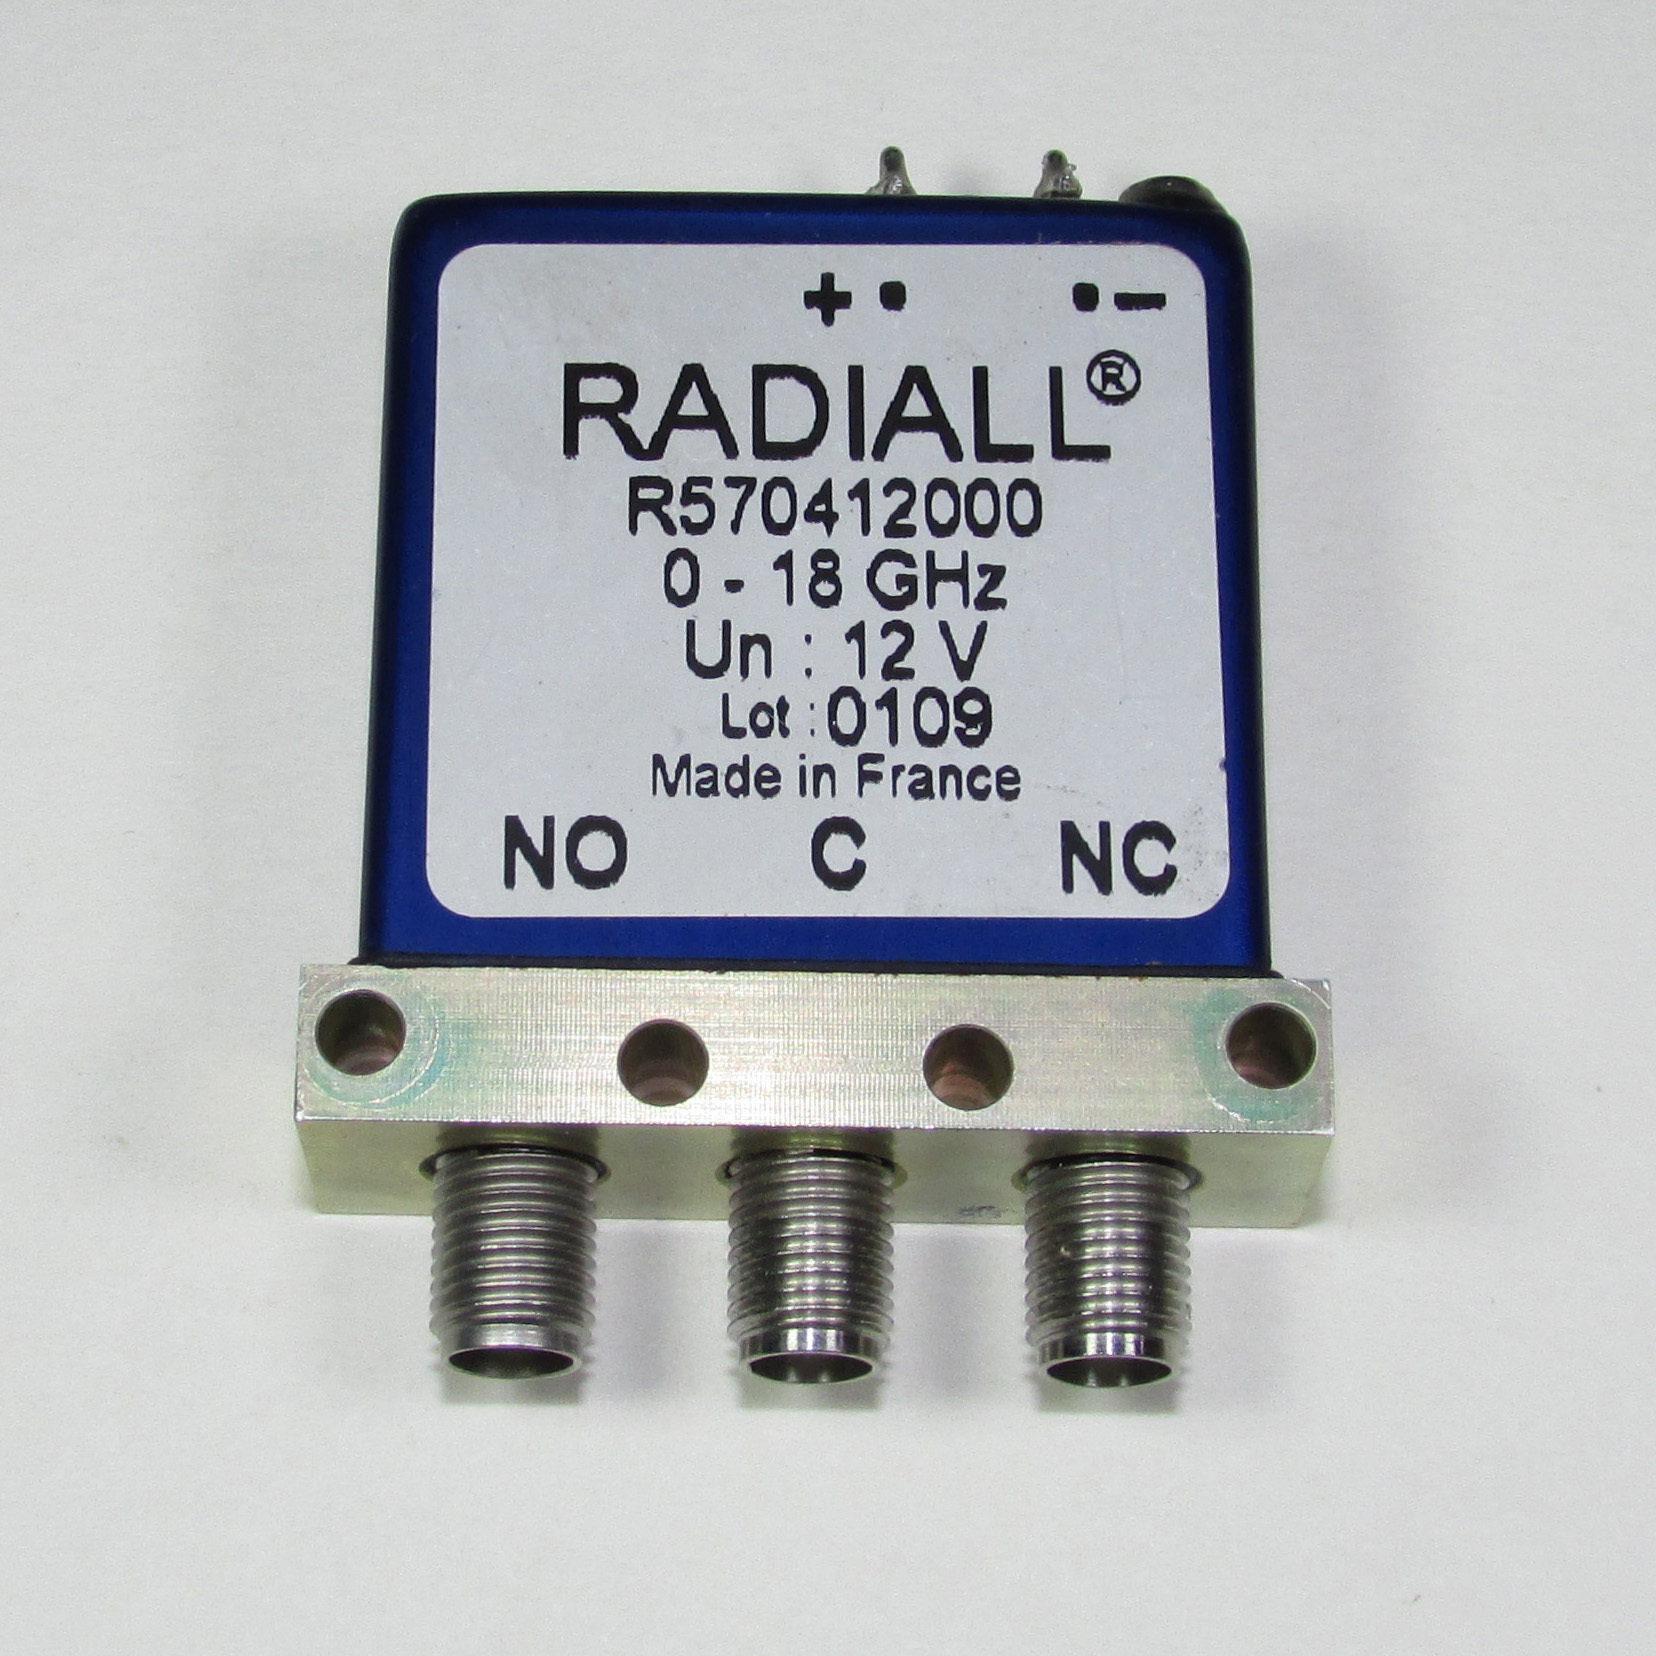 RADIALL R570412000 DC-18GHz 12V SMA RF microwave coaxial single pole double throw switch